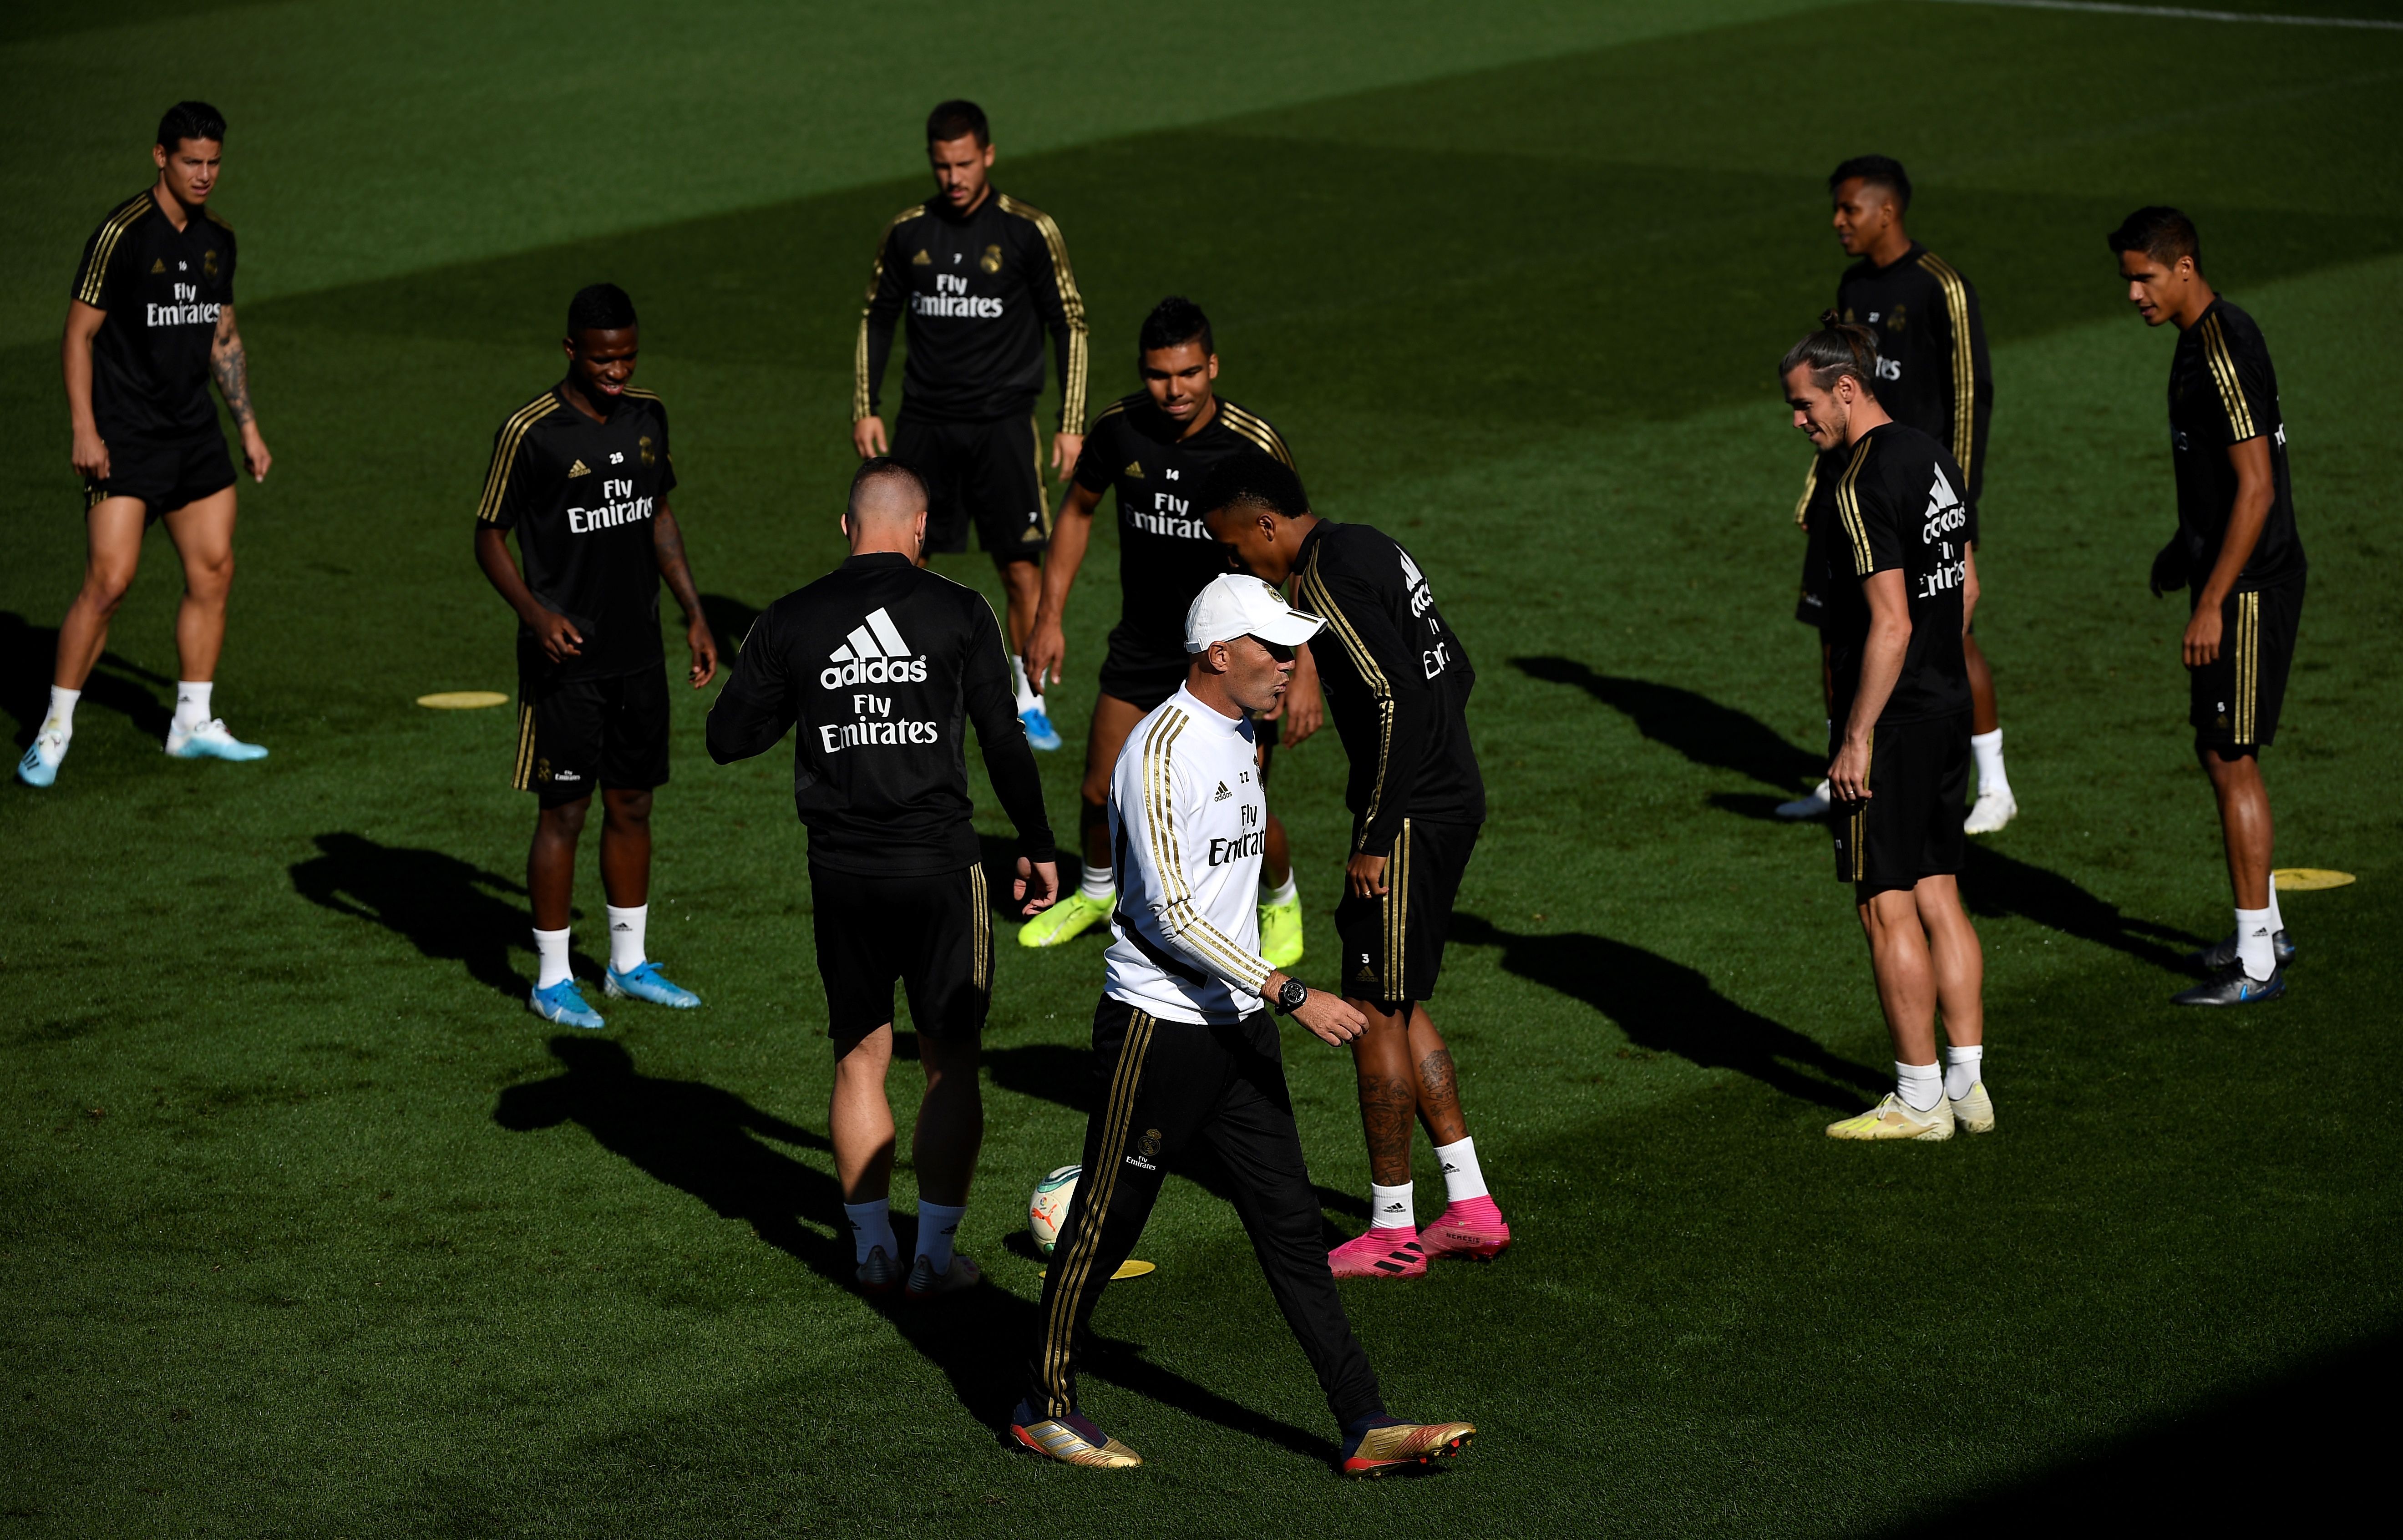 Real Madrid's French coach Zinedine Zidane (C) walks by his players during a training session at Valdebebas Sport City in Madrid on October 4, 2019 on the eve of a Liga football match against Granada. (Photo by PIERRE-PHILIPPE MARCOU / AFP) (Photo by PIERRE-PHILIPPE MARCOU/AFP via Getty Images)